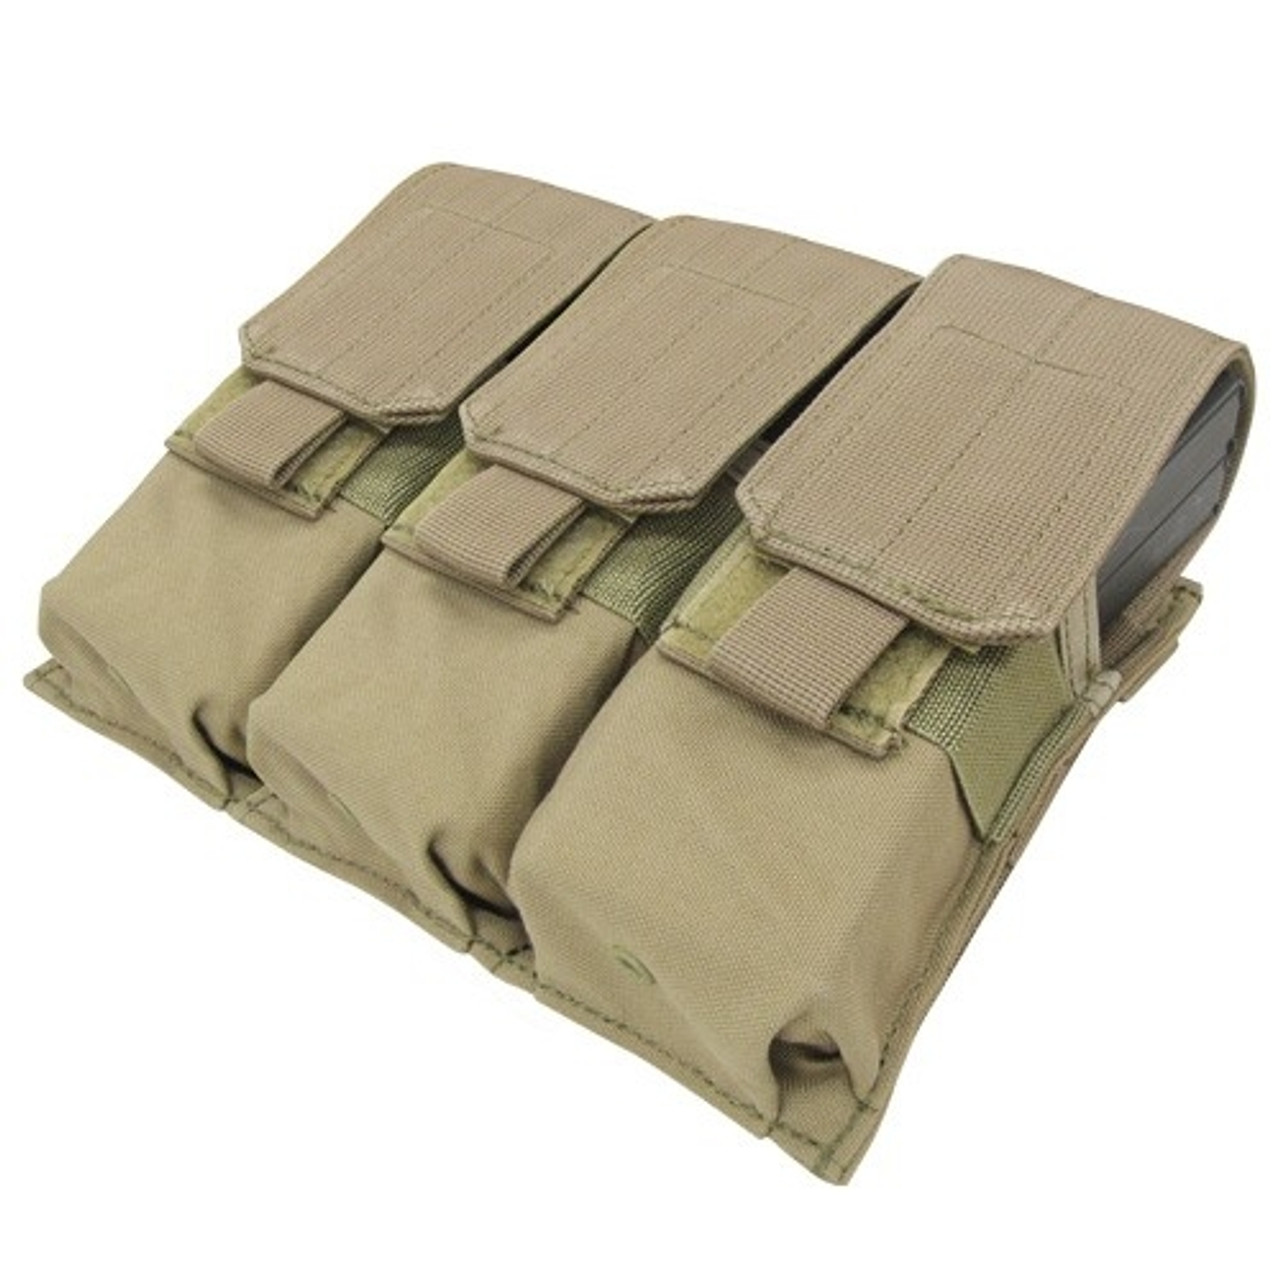 Condor Tactical Molle Triple Closed Top M4/M16 Mag Pouch - Tan